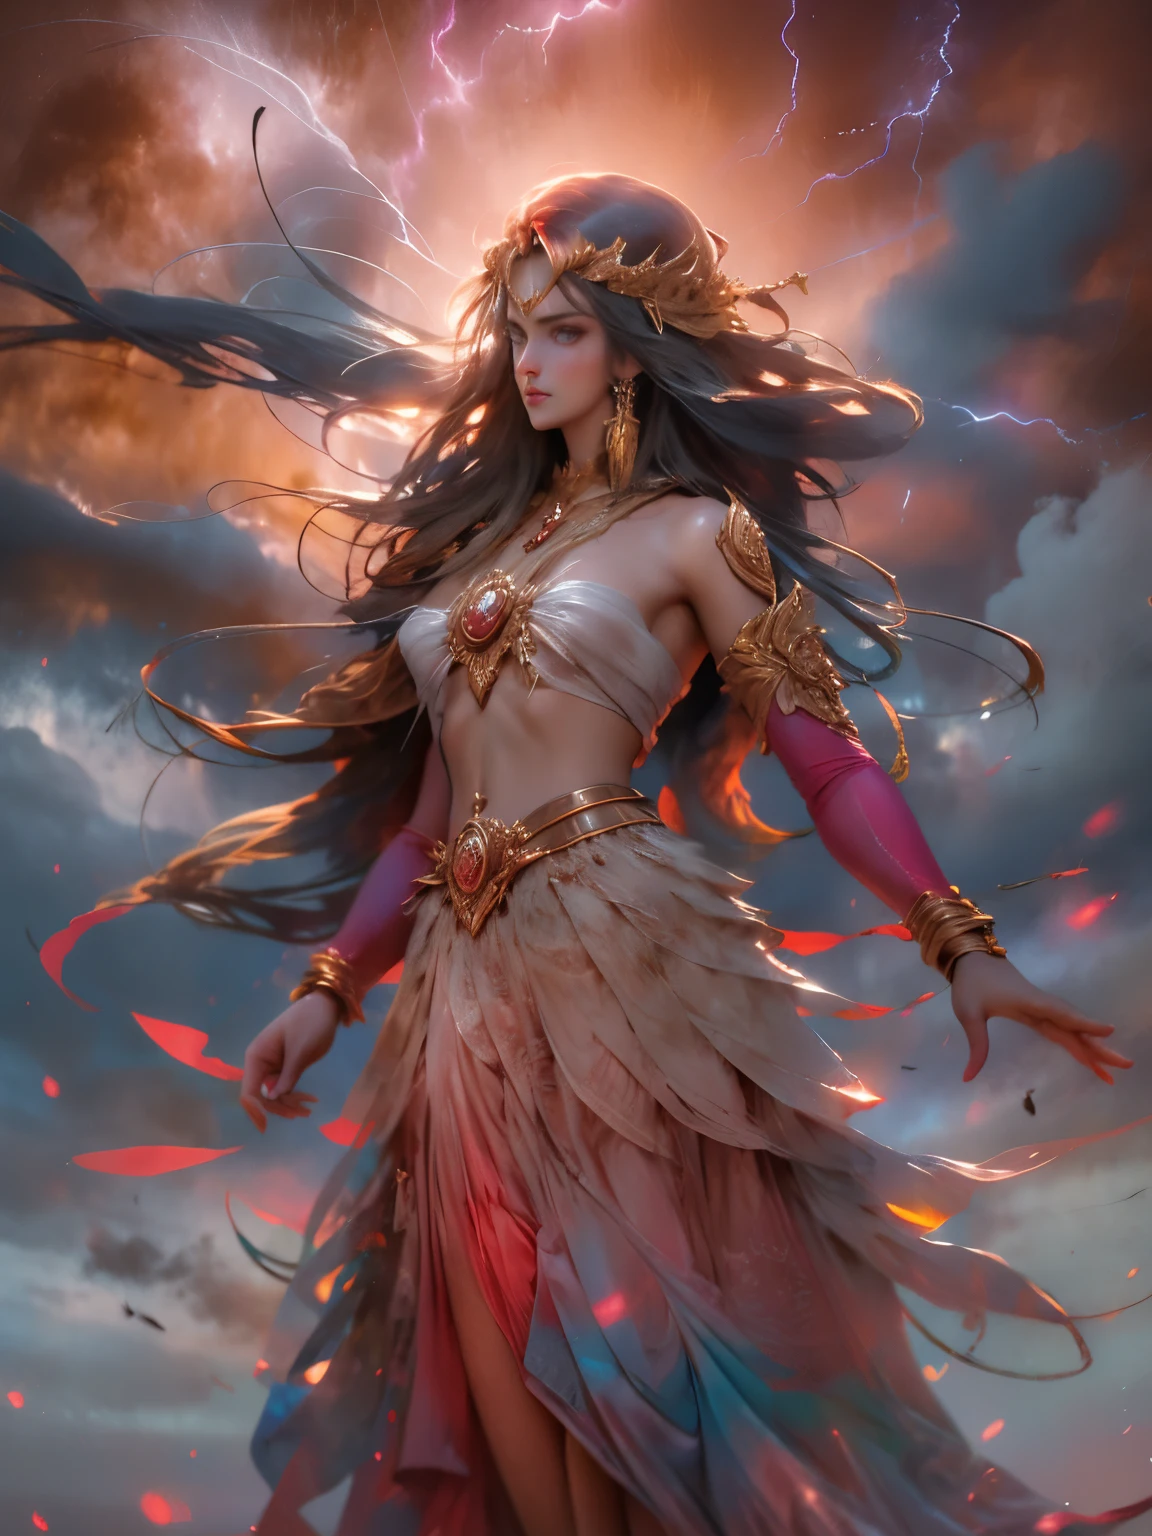 BEAUTIFUL WOMAN in the mountain, sunset sky, red sunset clouds, sunset, long hair in the wind, Eagle feathers, eagle queen, goddess dressed in Eagle feathers, fancy, overexposure, perfects eyes, metallic colors, SurrealArt , whole body, barefoot, mountain horizon view, lake in the distance, lady in the center of the scene, huge full moon in front of the sun, ((clothing transparent)), ((dark storm clouds with lightning)), lightning strikes, garoa leve, fog in the distance, goddess on top of the mountain,